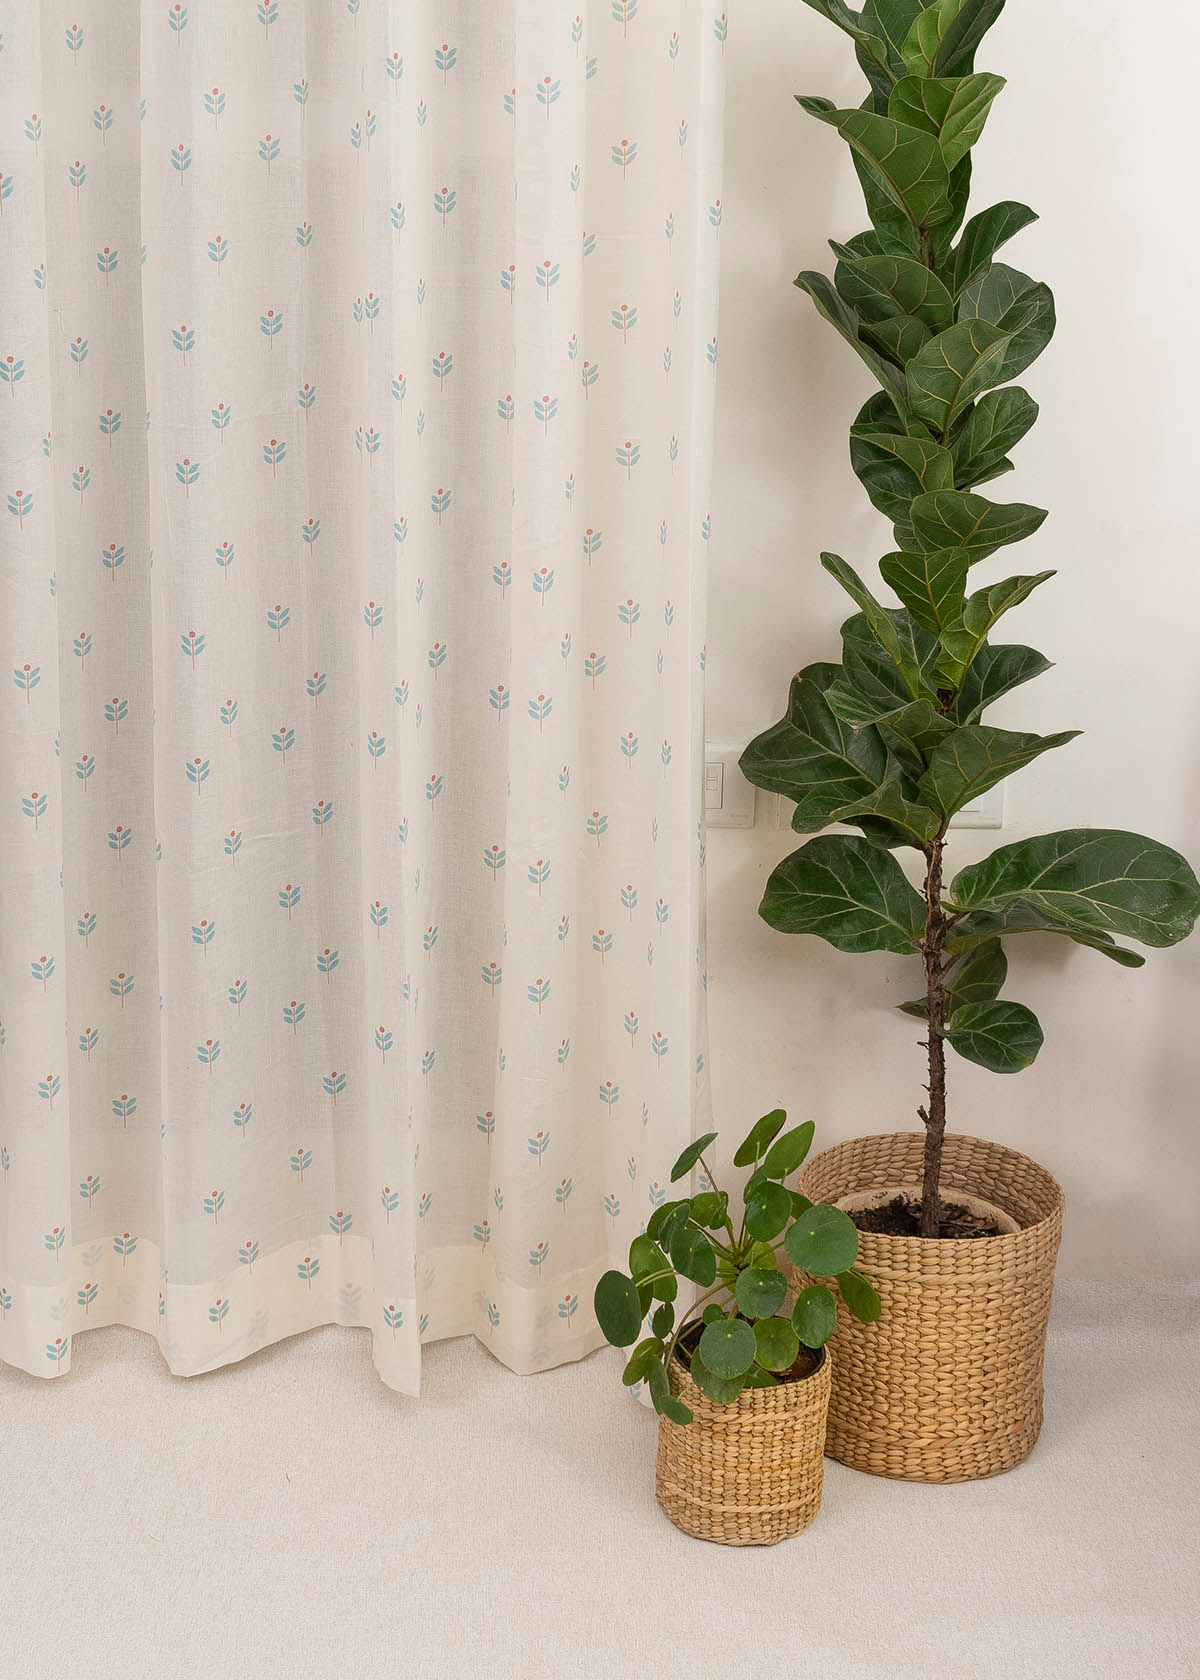 Sapling 100% Cotton Sheer floral curtain for Living room - Light filtering - Nile Blue - Pack of 1